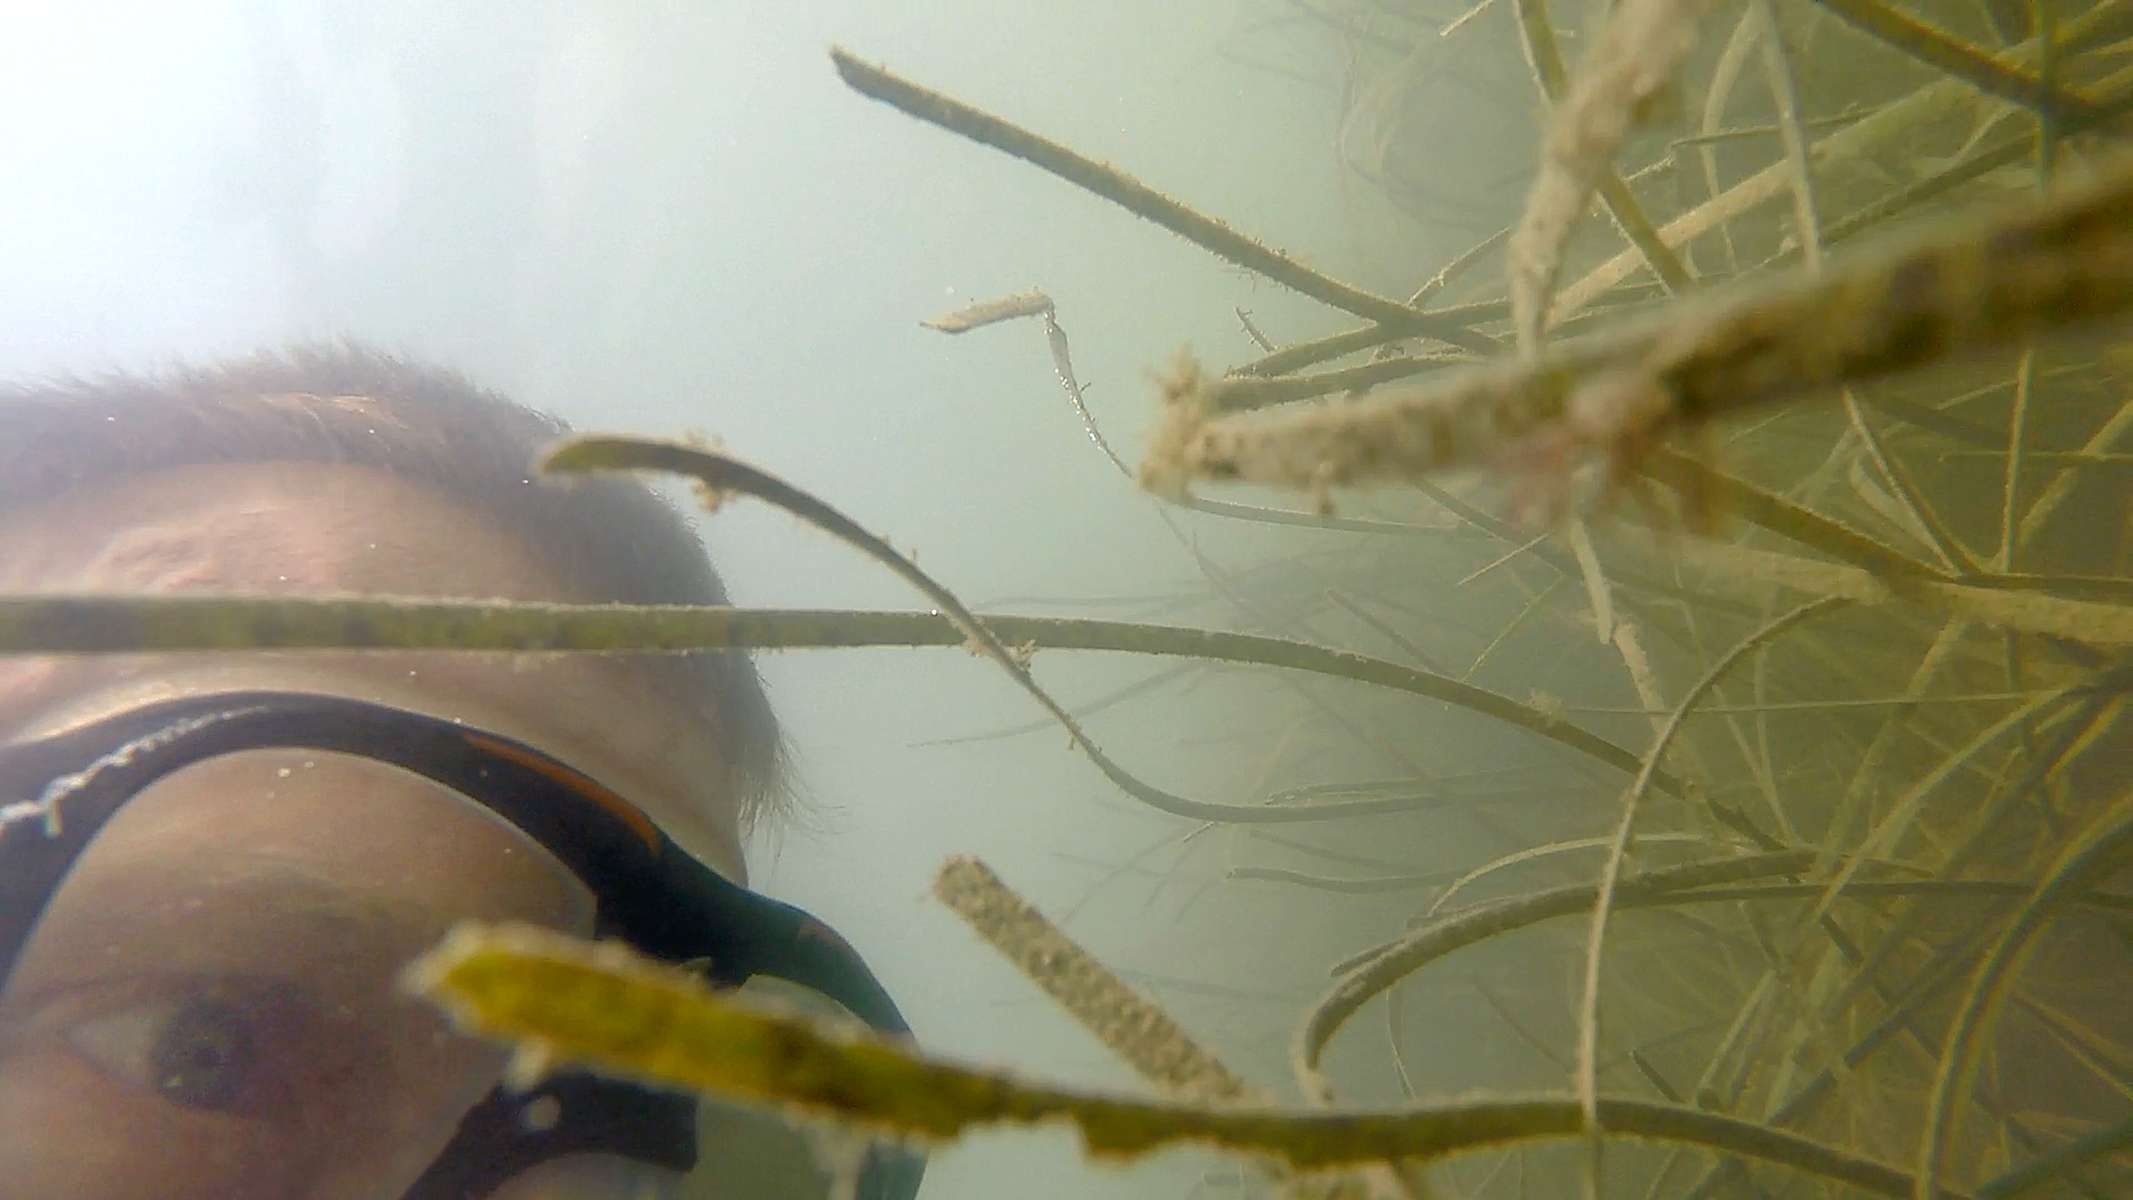 Paul Richardson swims through seagrass in the water of South Bay off the Eastern Shore Tuesday morning with other VIMS scientists looking for bay scallops August 1, 2017. The scientists were conducting a scallop survey, collecting, measuring and counting ones they found as part of an effort to rehabilitate the stock by restoring seagrasses. 